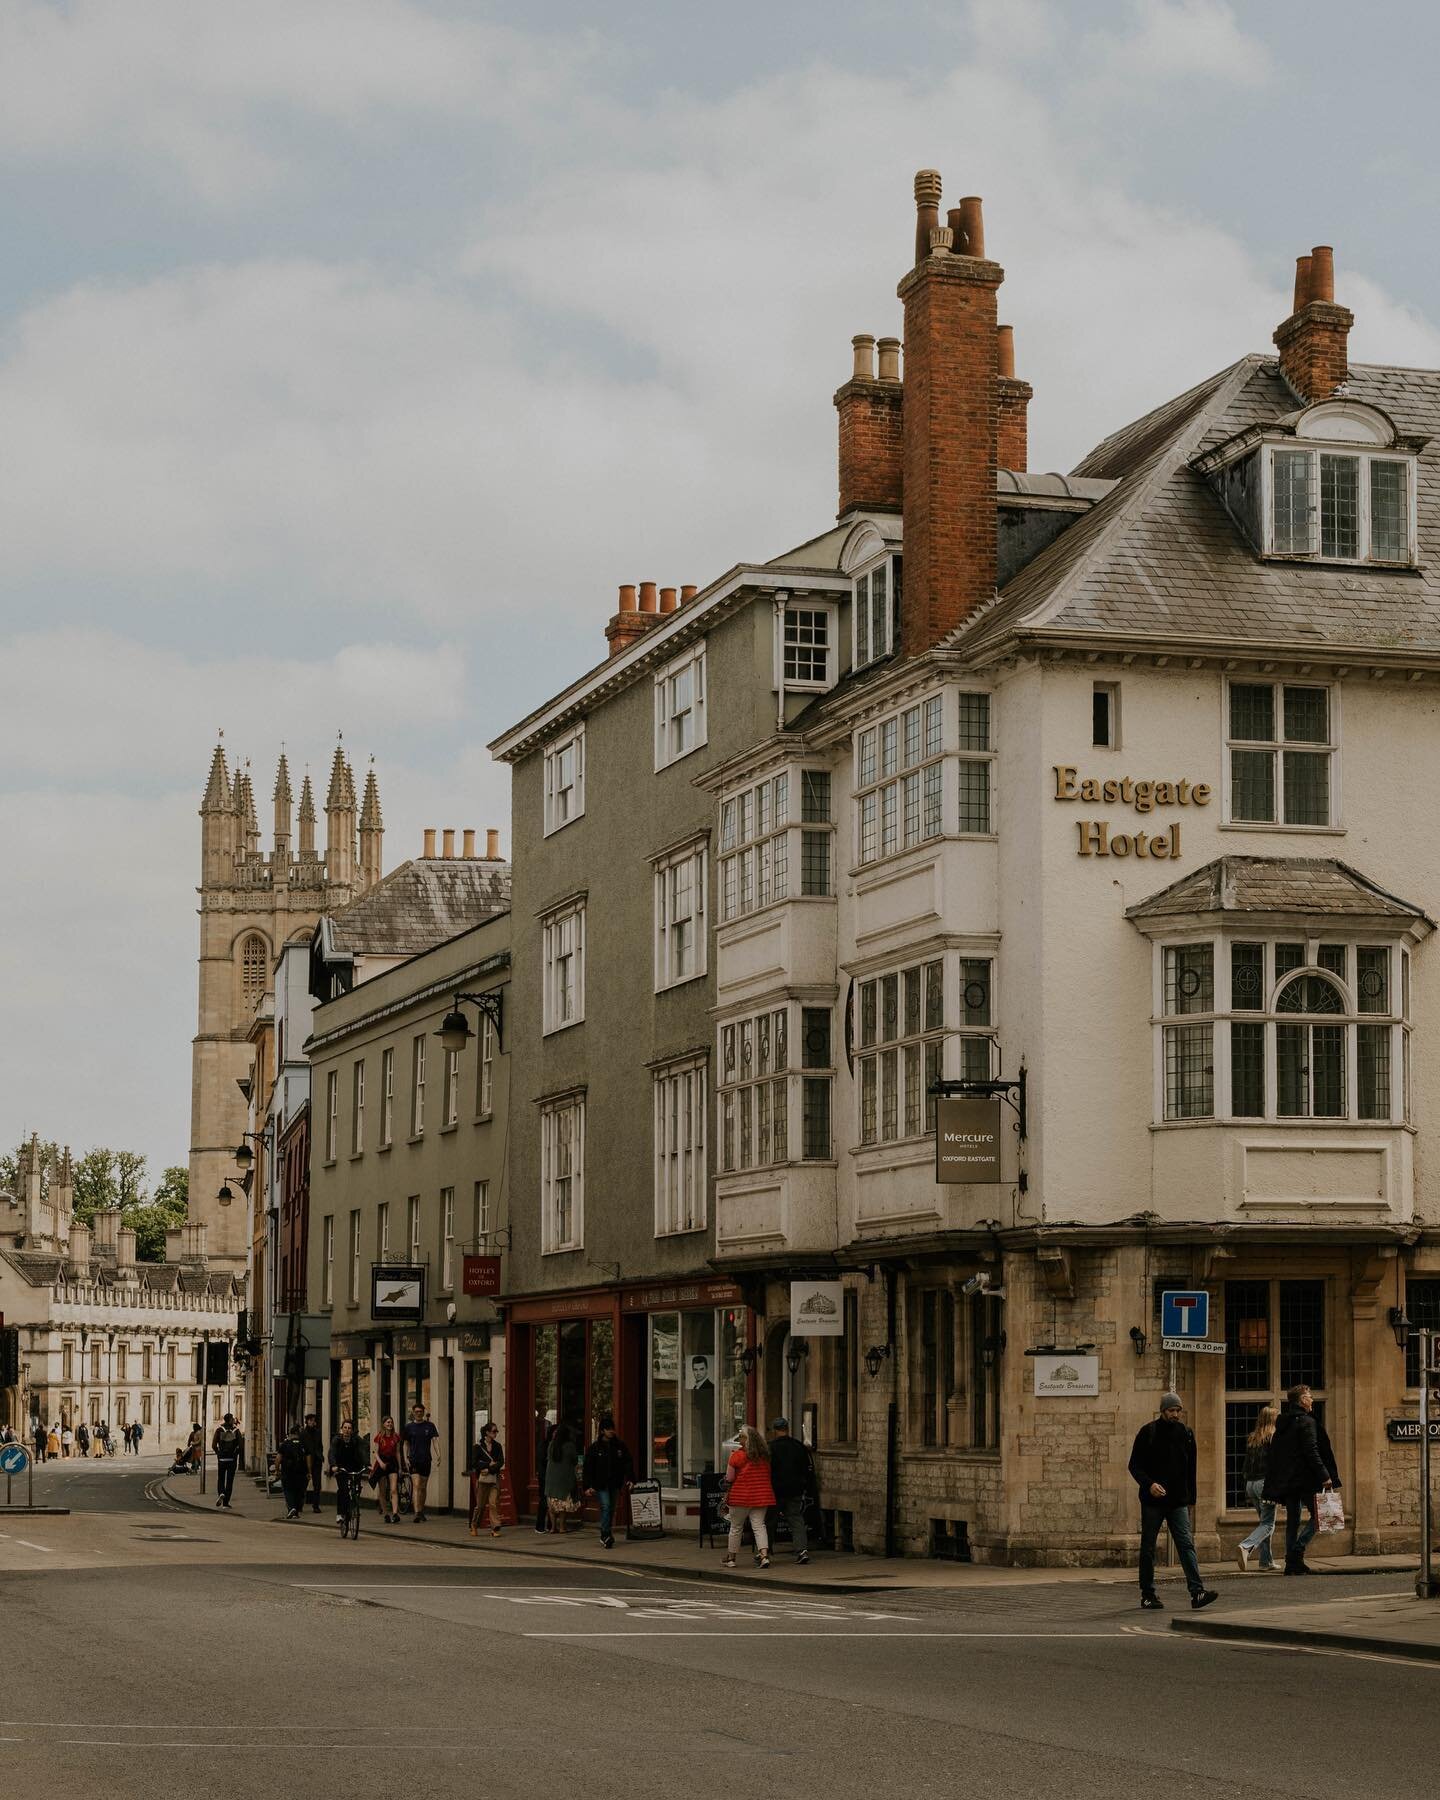 Oxford high street and the @mercureoxfordeastgatehotel 🇬🇧